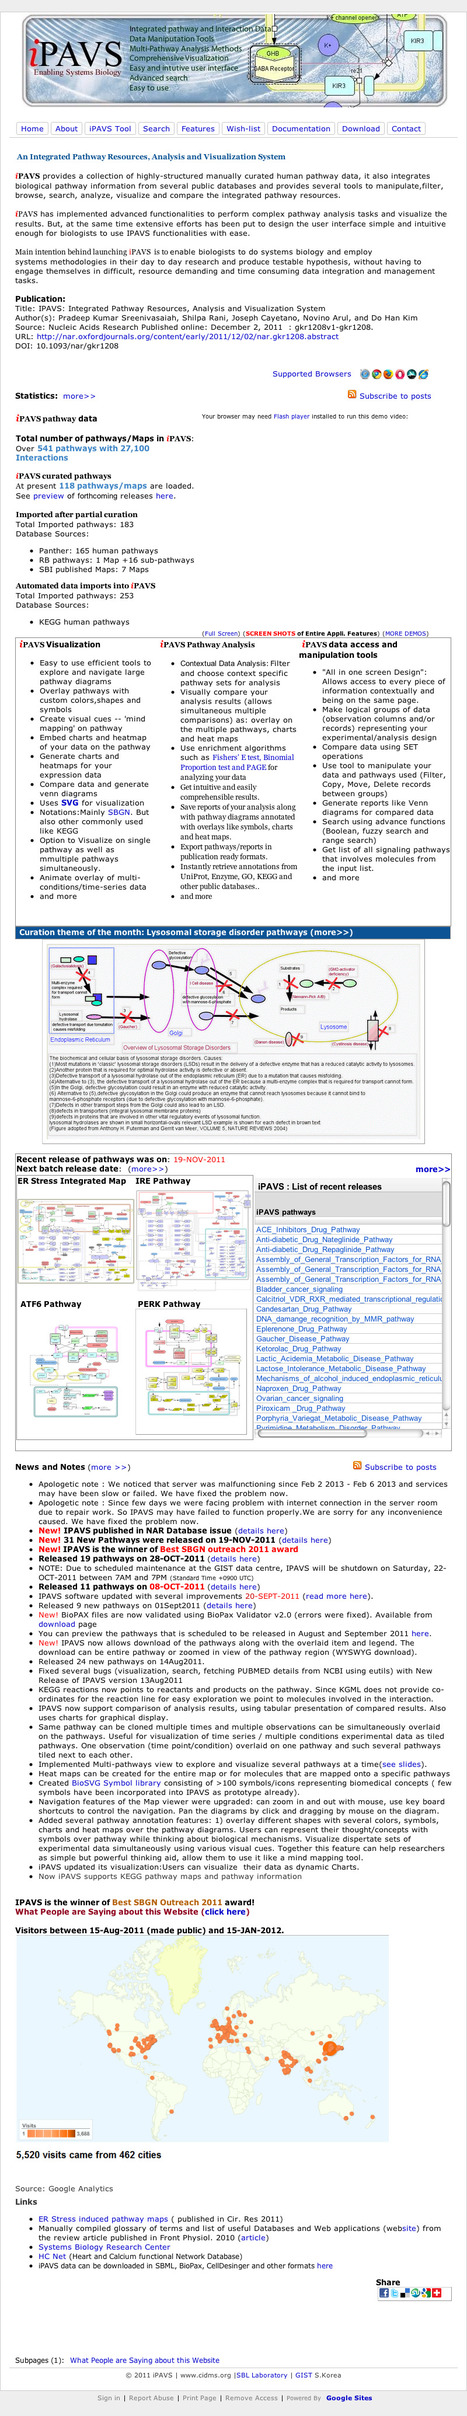 iPAVS - A highly structured manually curated pathway database | bioinformatics-databases | Scoop.it